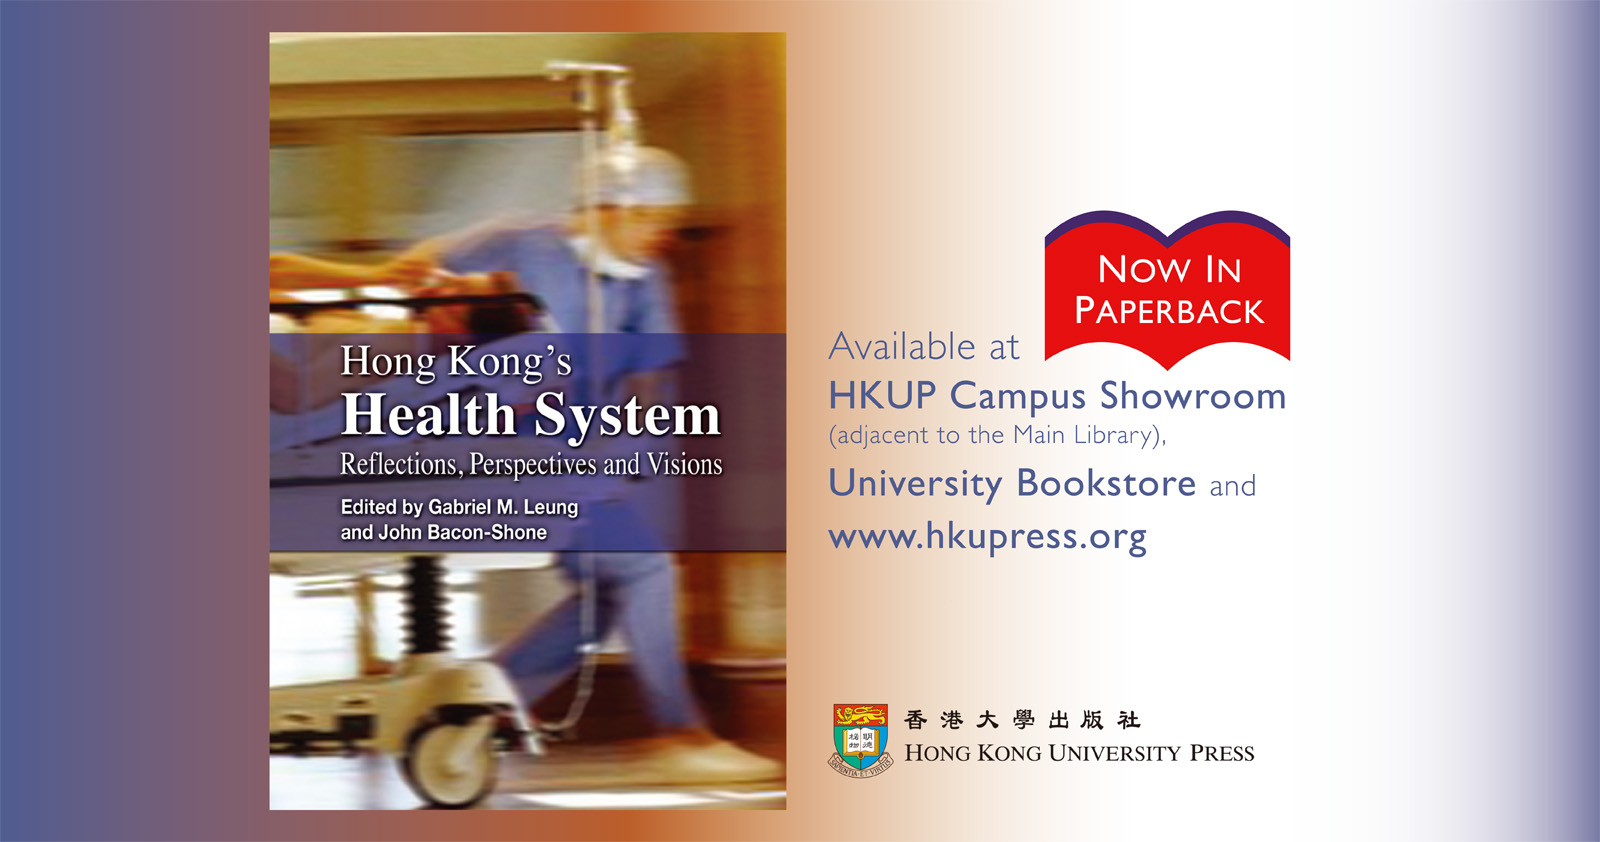 Hong Kong's Health System - Now in Paperback at HKU Press!